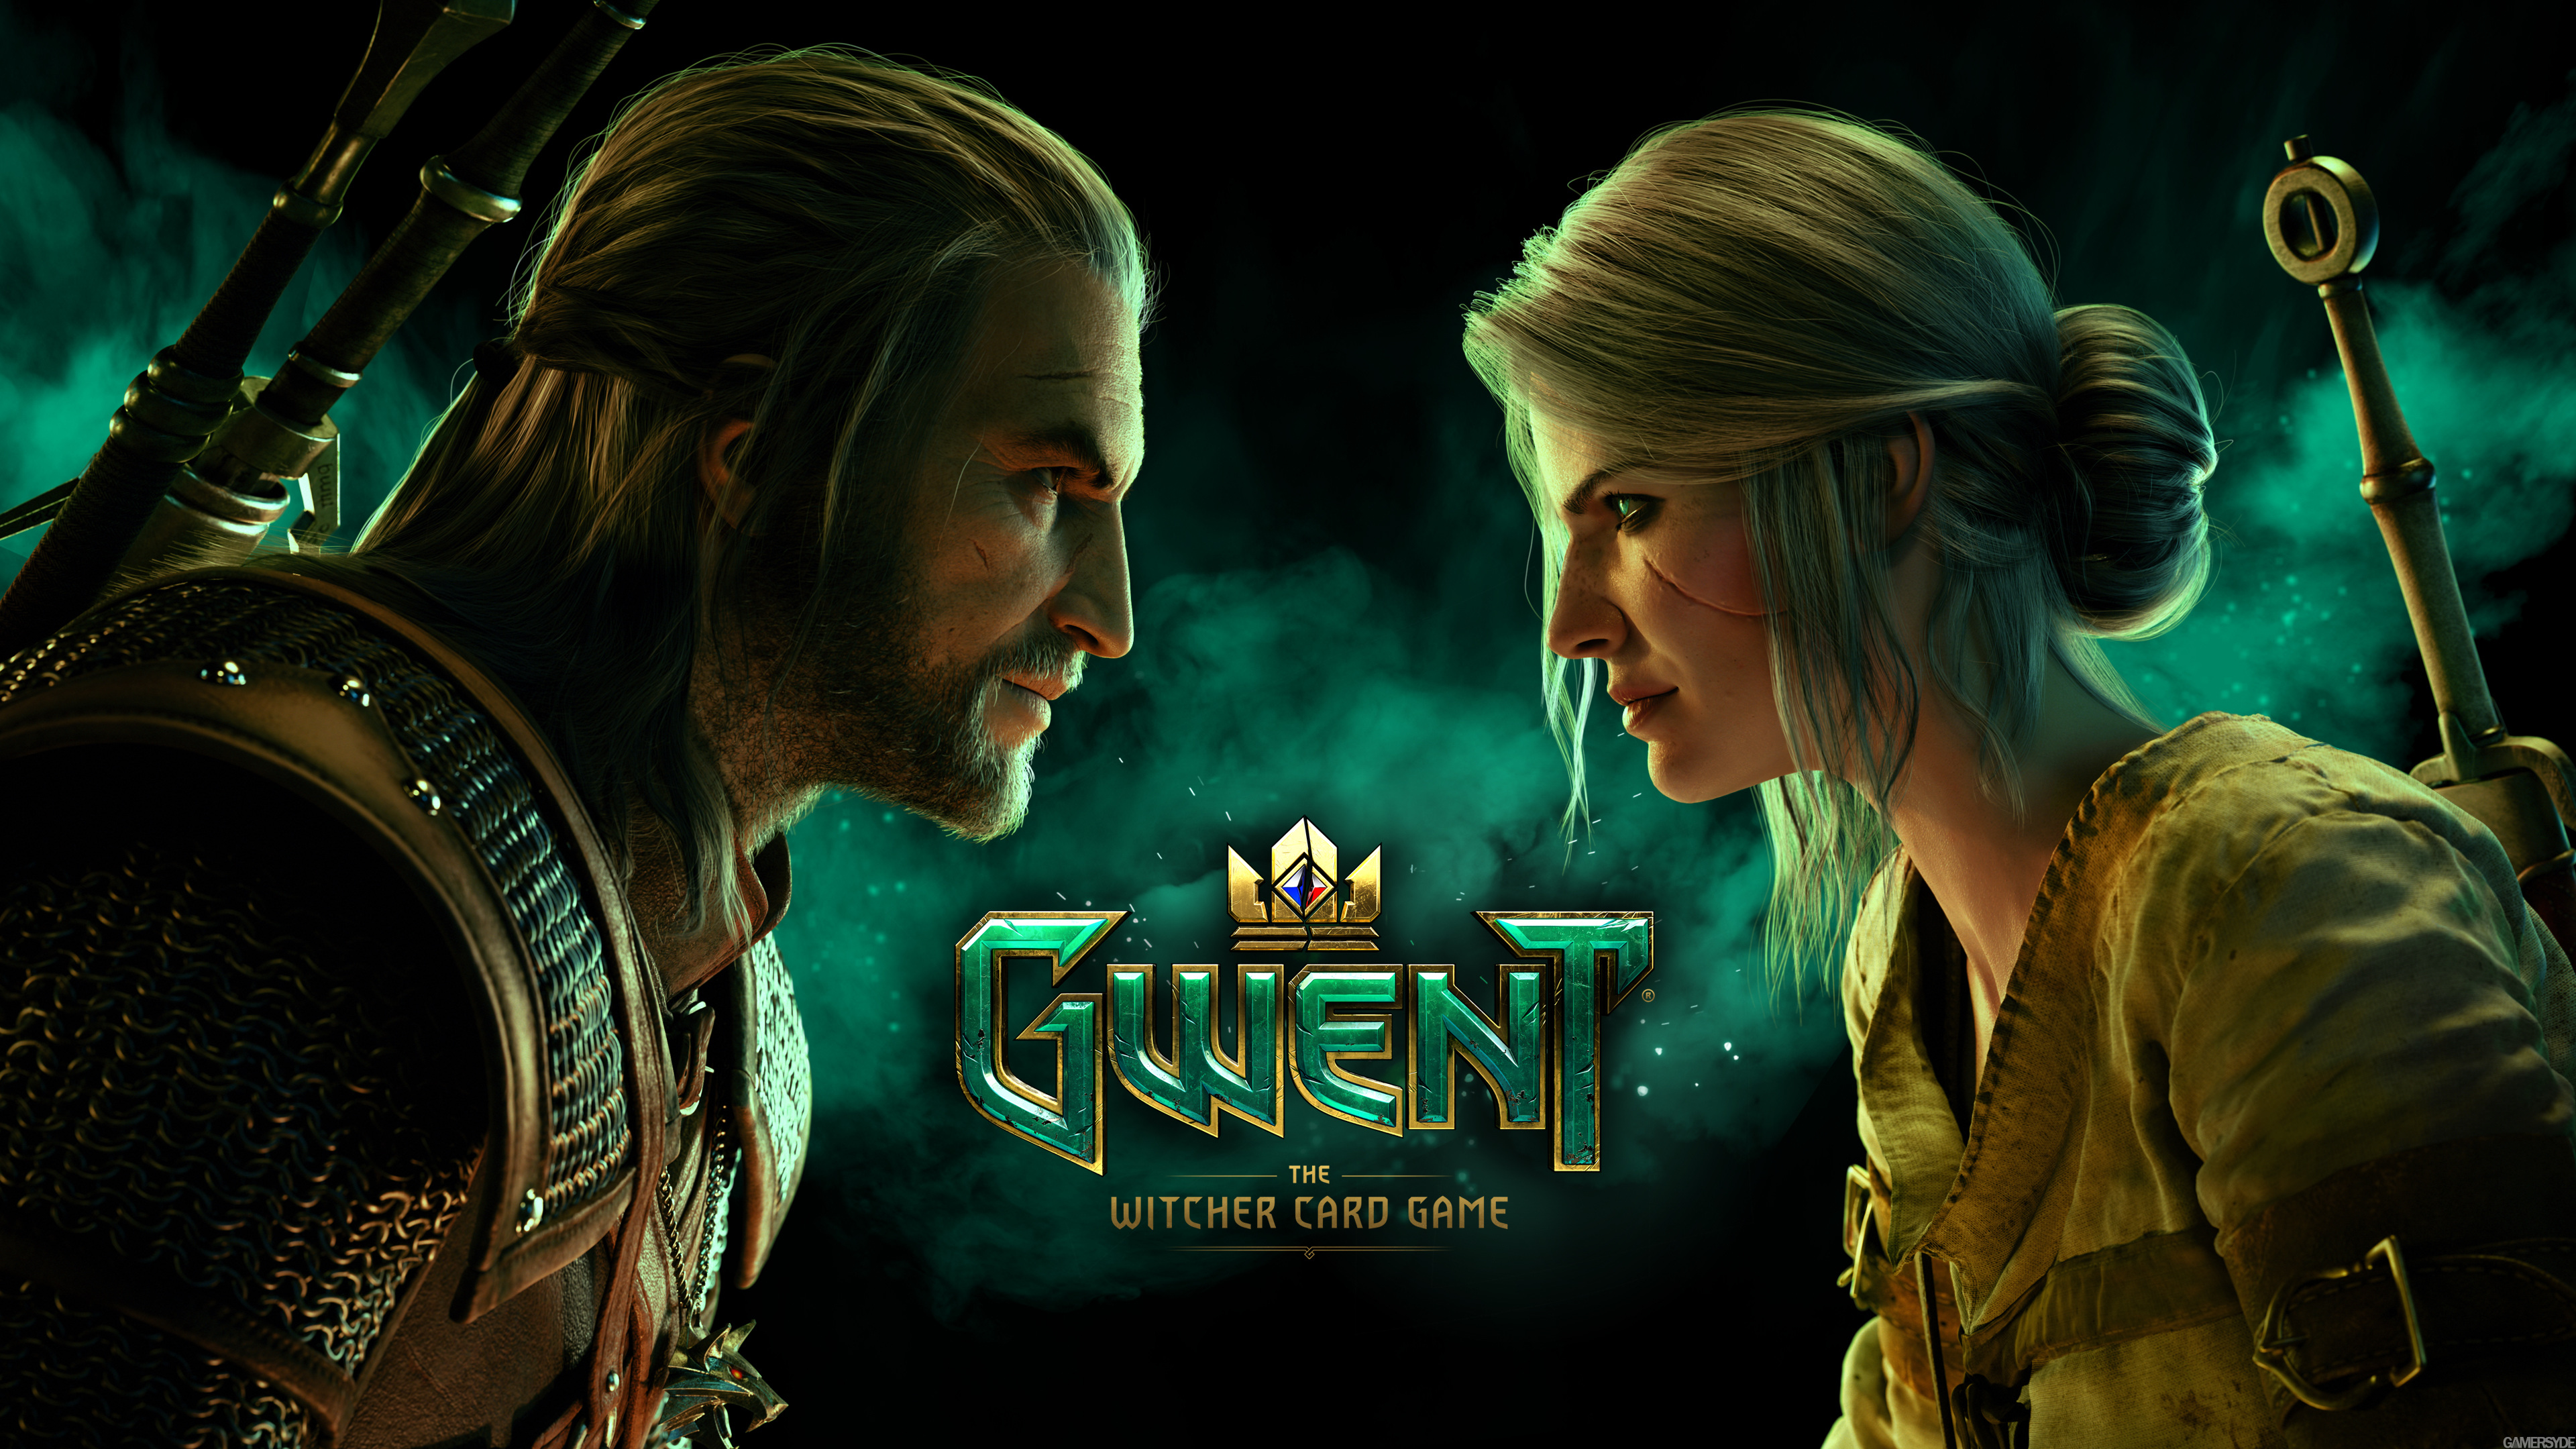 video game, gwent: the witcher card game, ciri (the witcher), geralt of rivia, the witcher